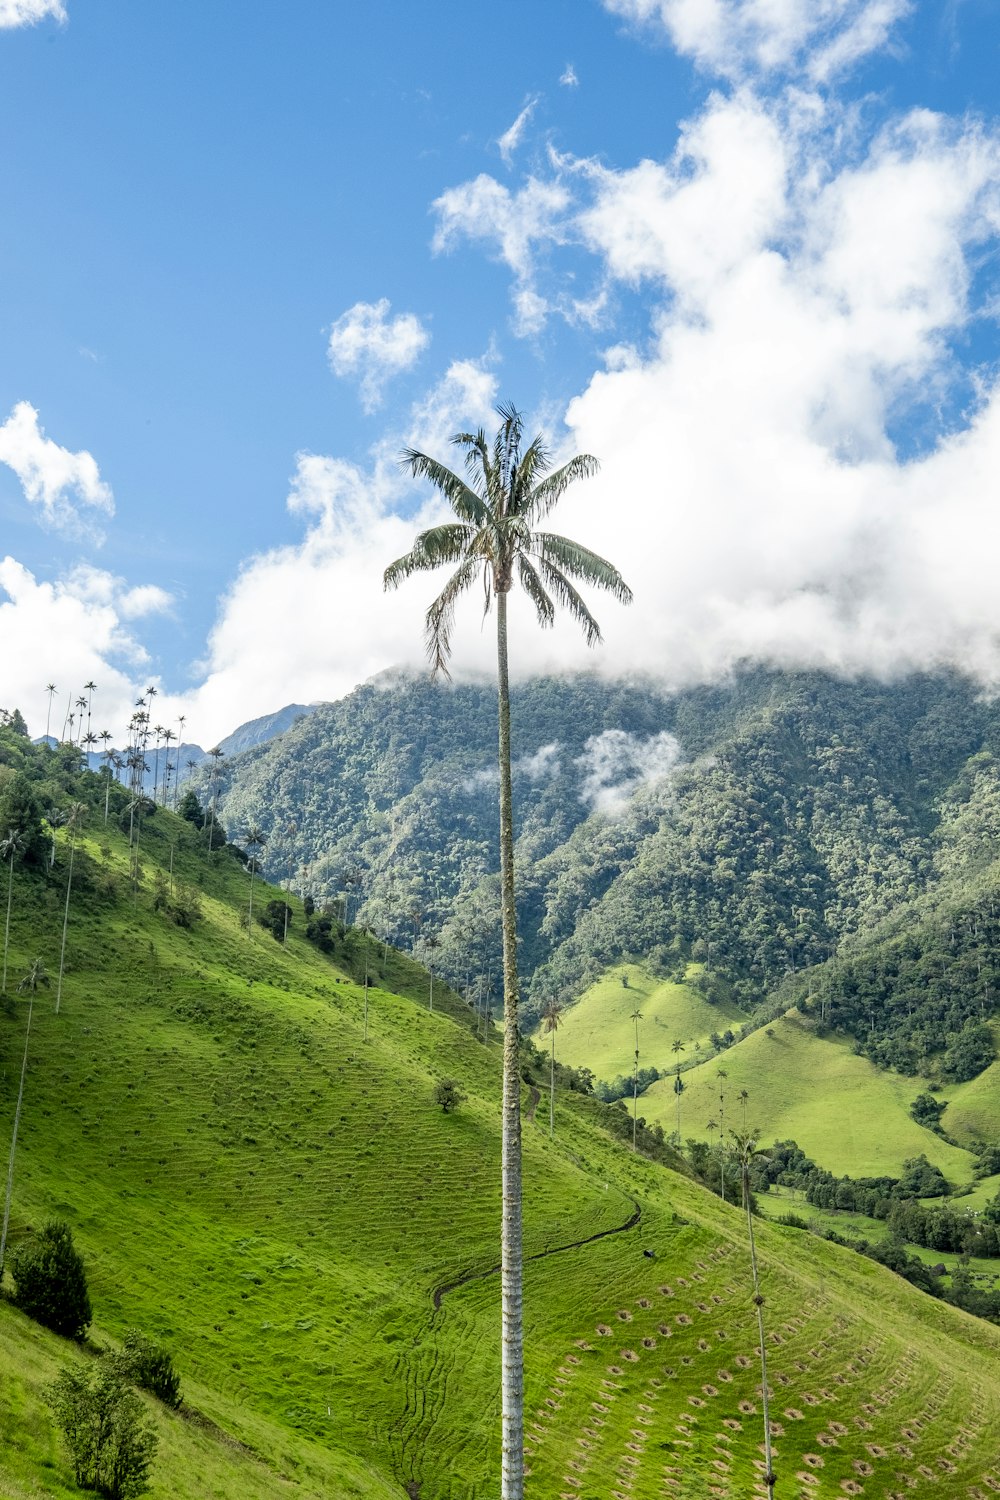 green palm tree between grass field under cloudy sky at daytime